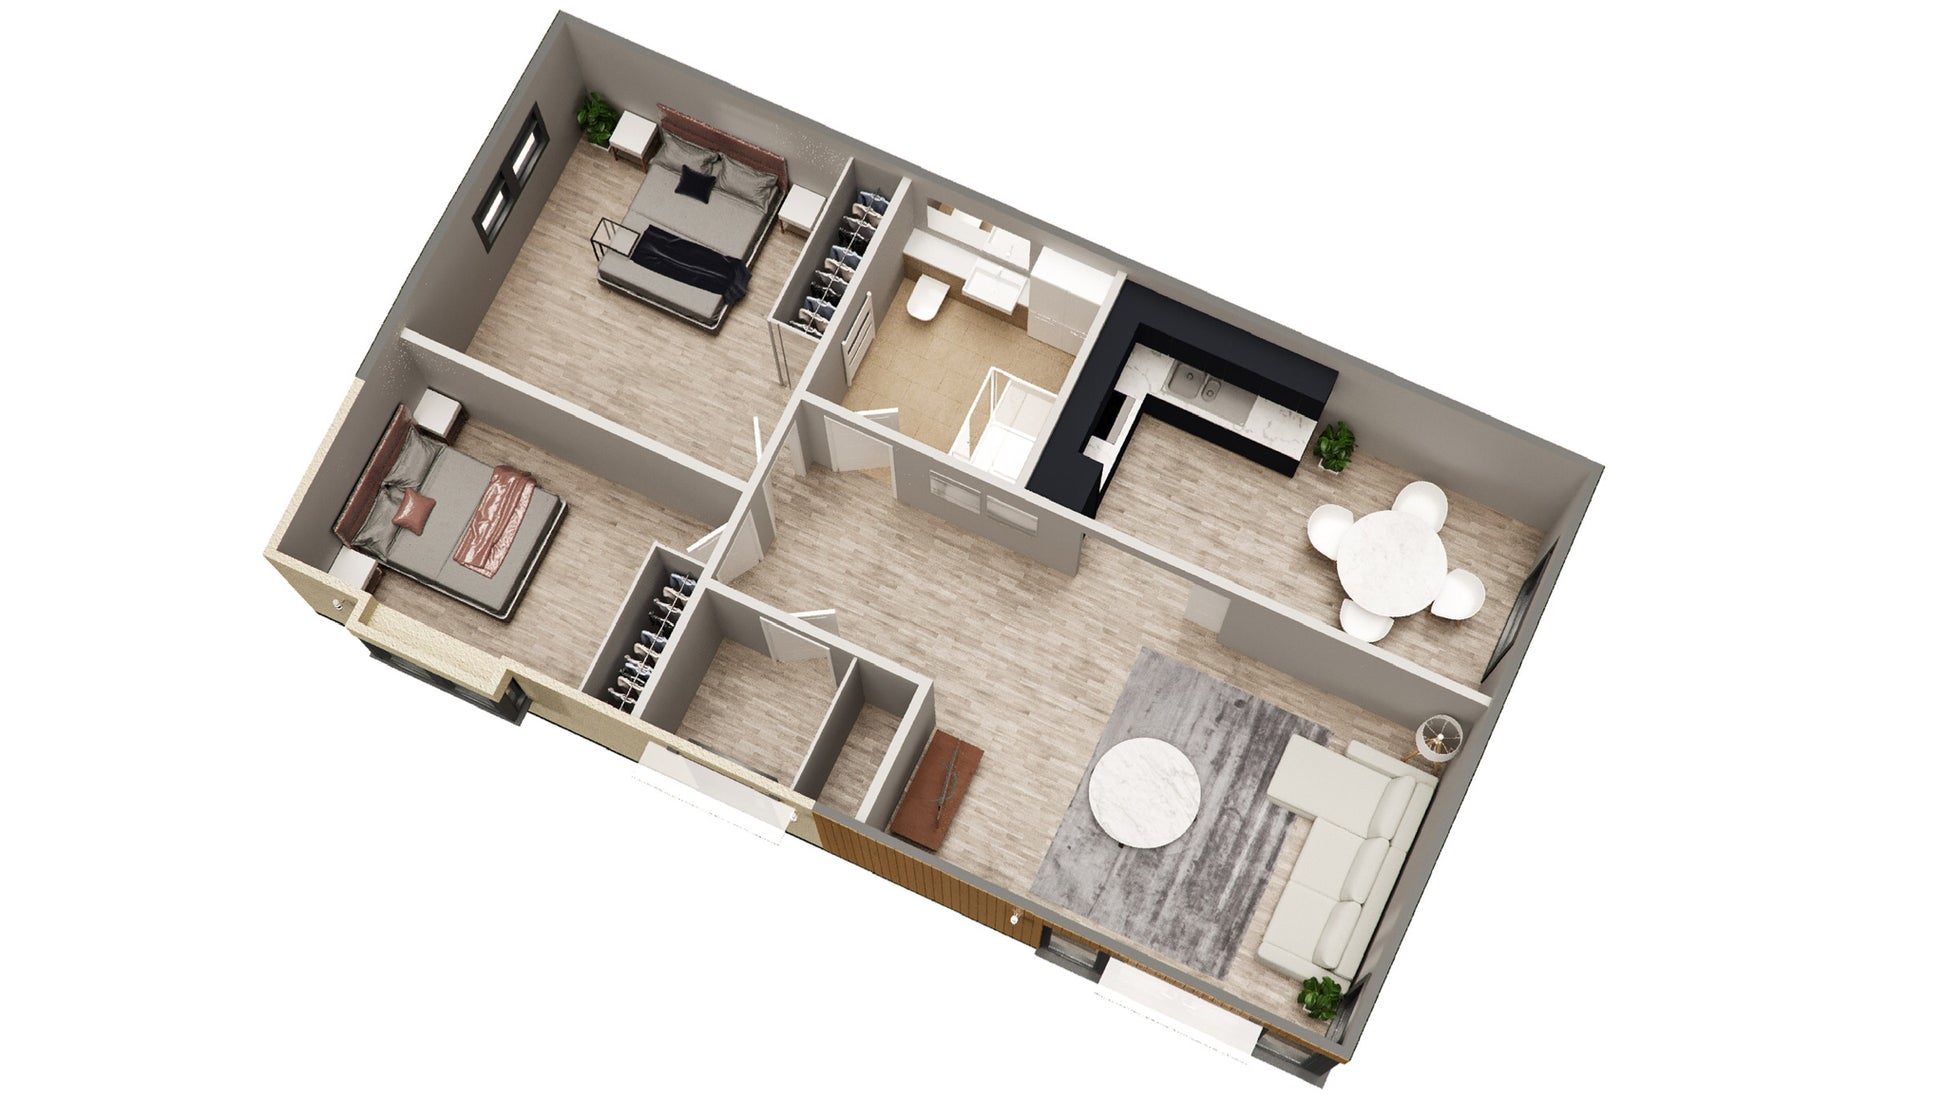 A 2 bedroom floorplan of a granny annexe including a kitchen and shower room